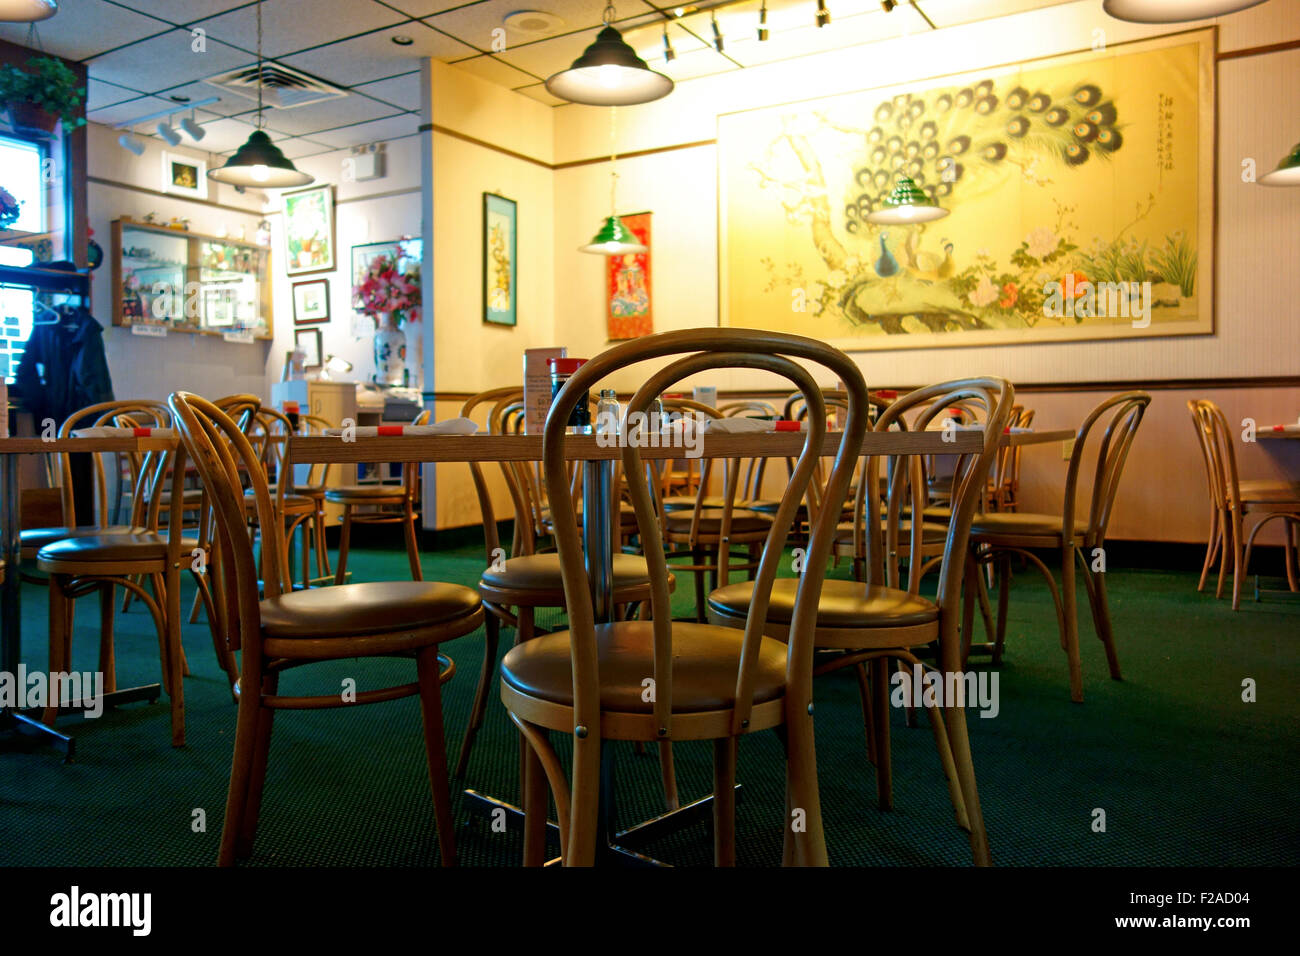 The interior of a Chinese Restaurant showing tables, chairs and wall hangings Stock Photo